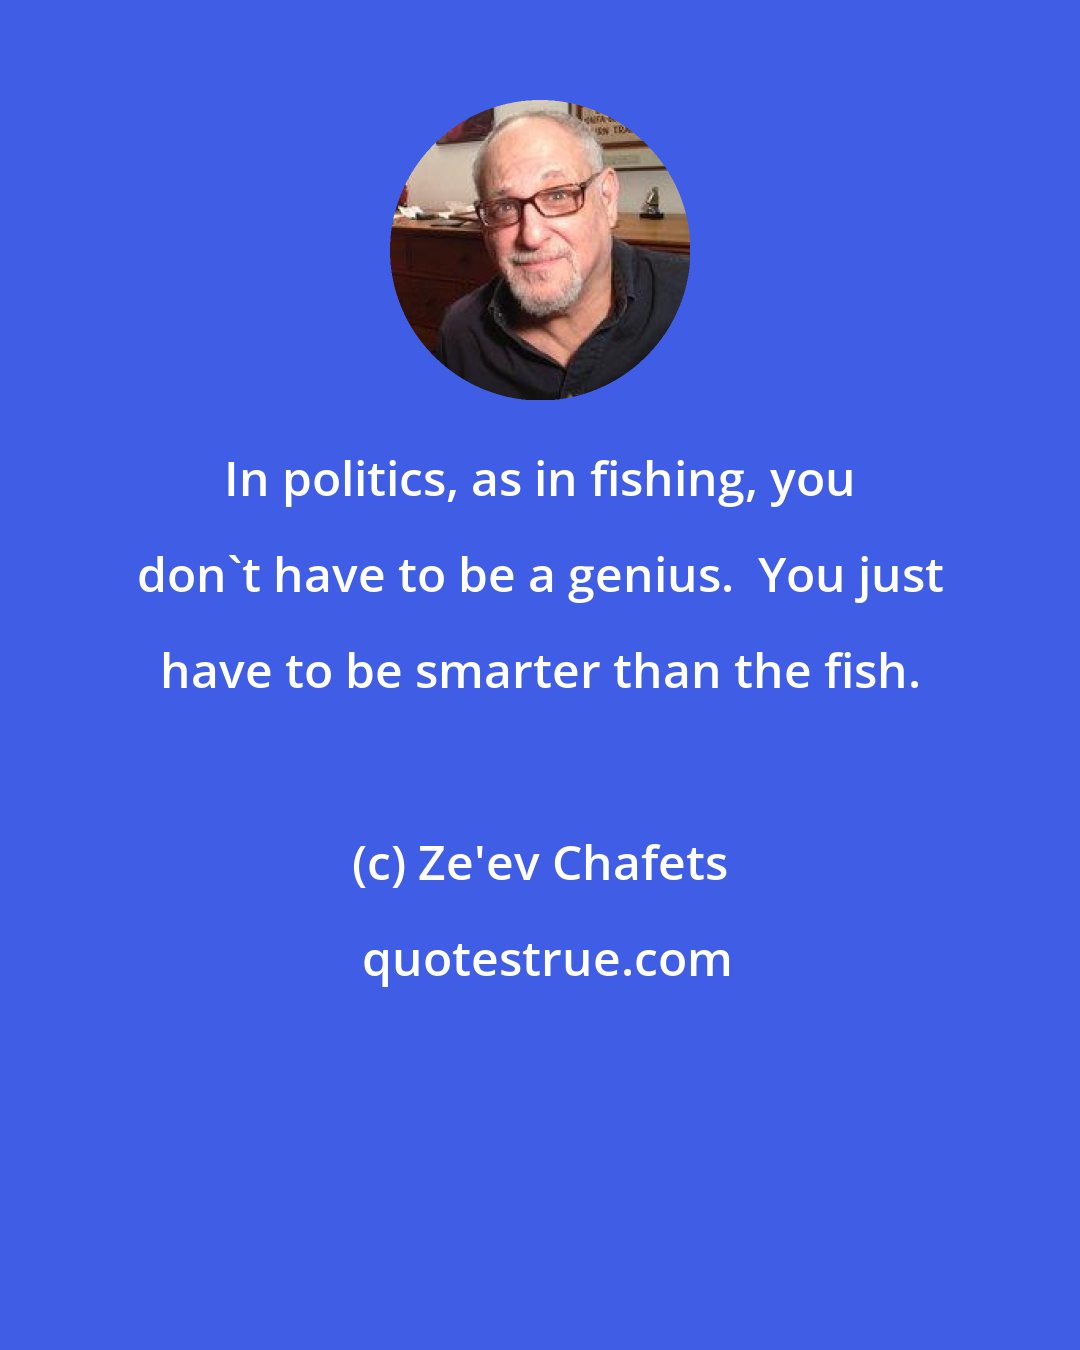 Ze'ev Chafets: In politics, as in fishing, you don't have to be a genius.  You just have to be smarter than the fish.